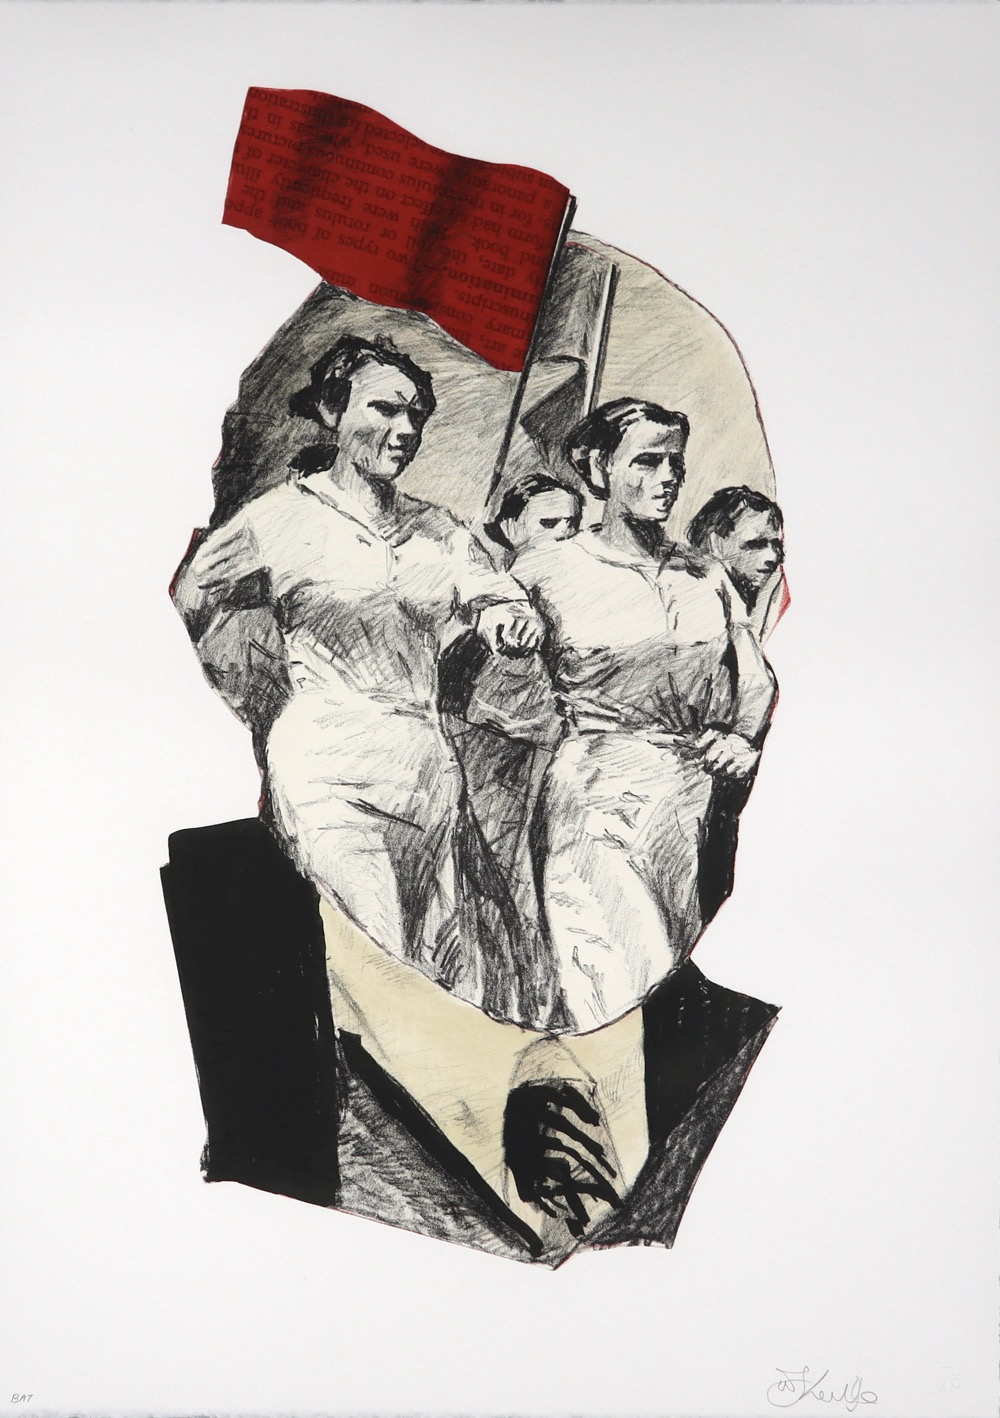 Head and shoulders outline of Lenin with marching women holding a red flag drawn into where facial features would usually be by William Kentridge